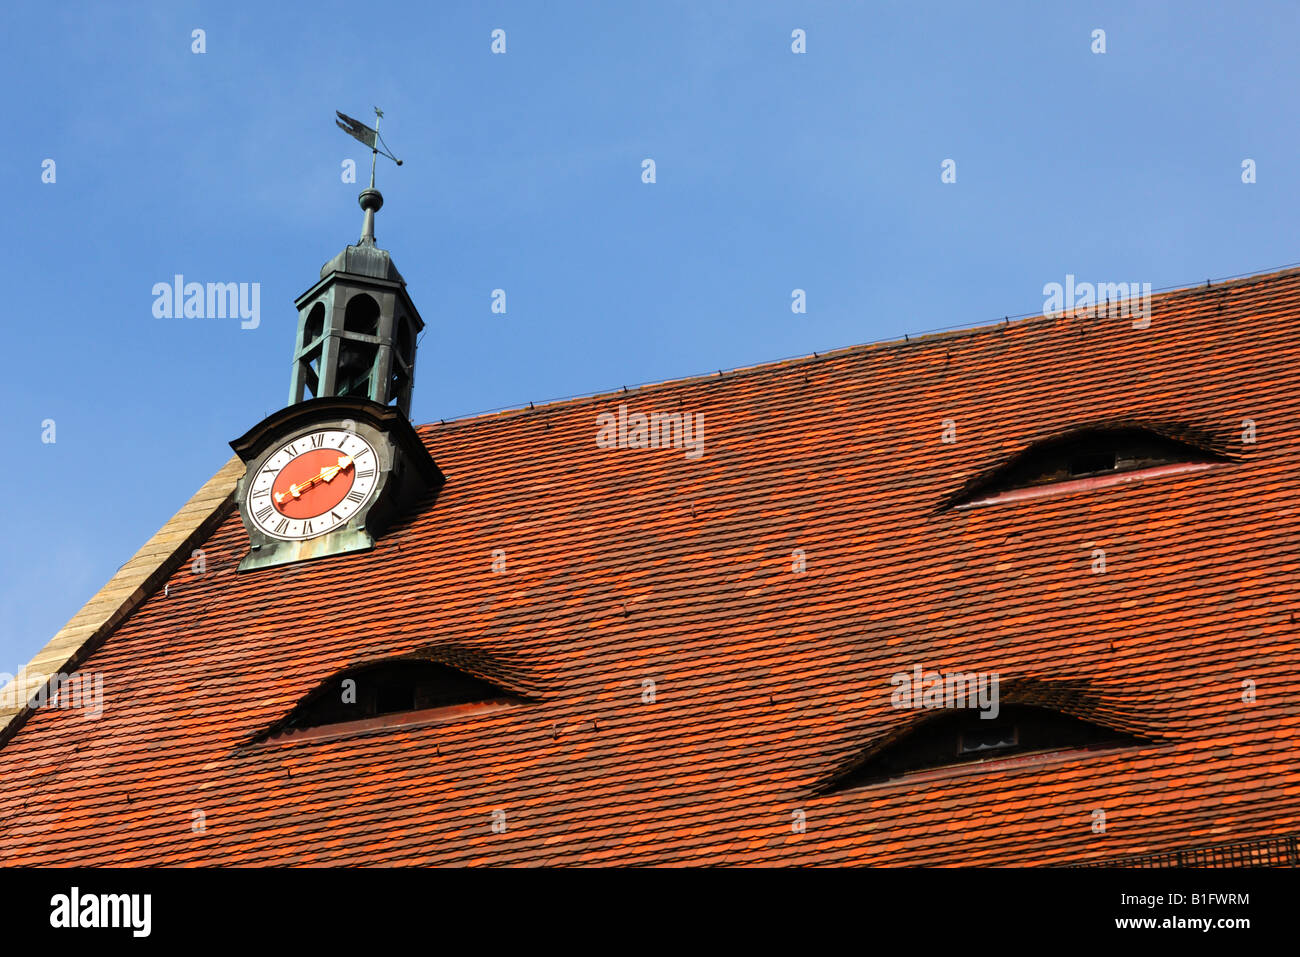 Tiled roof with dormer, clocktower, and weather vane, parish church St Johannis, Ansbach, Bavaria, Germany Stock Photo